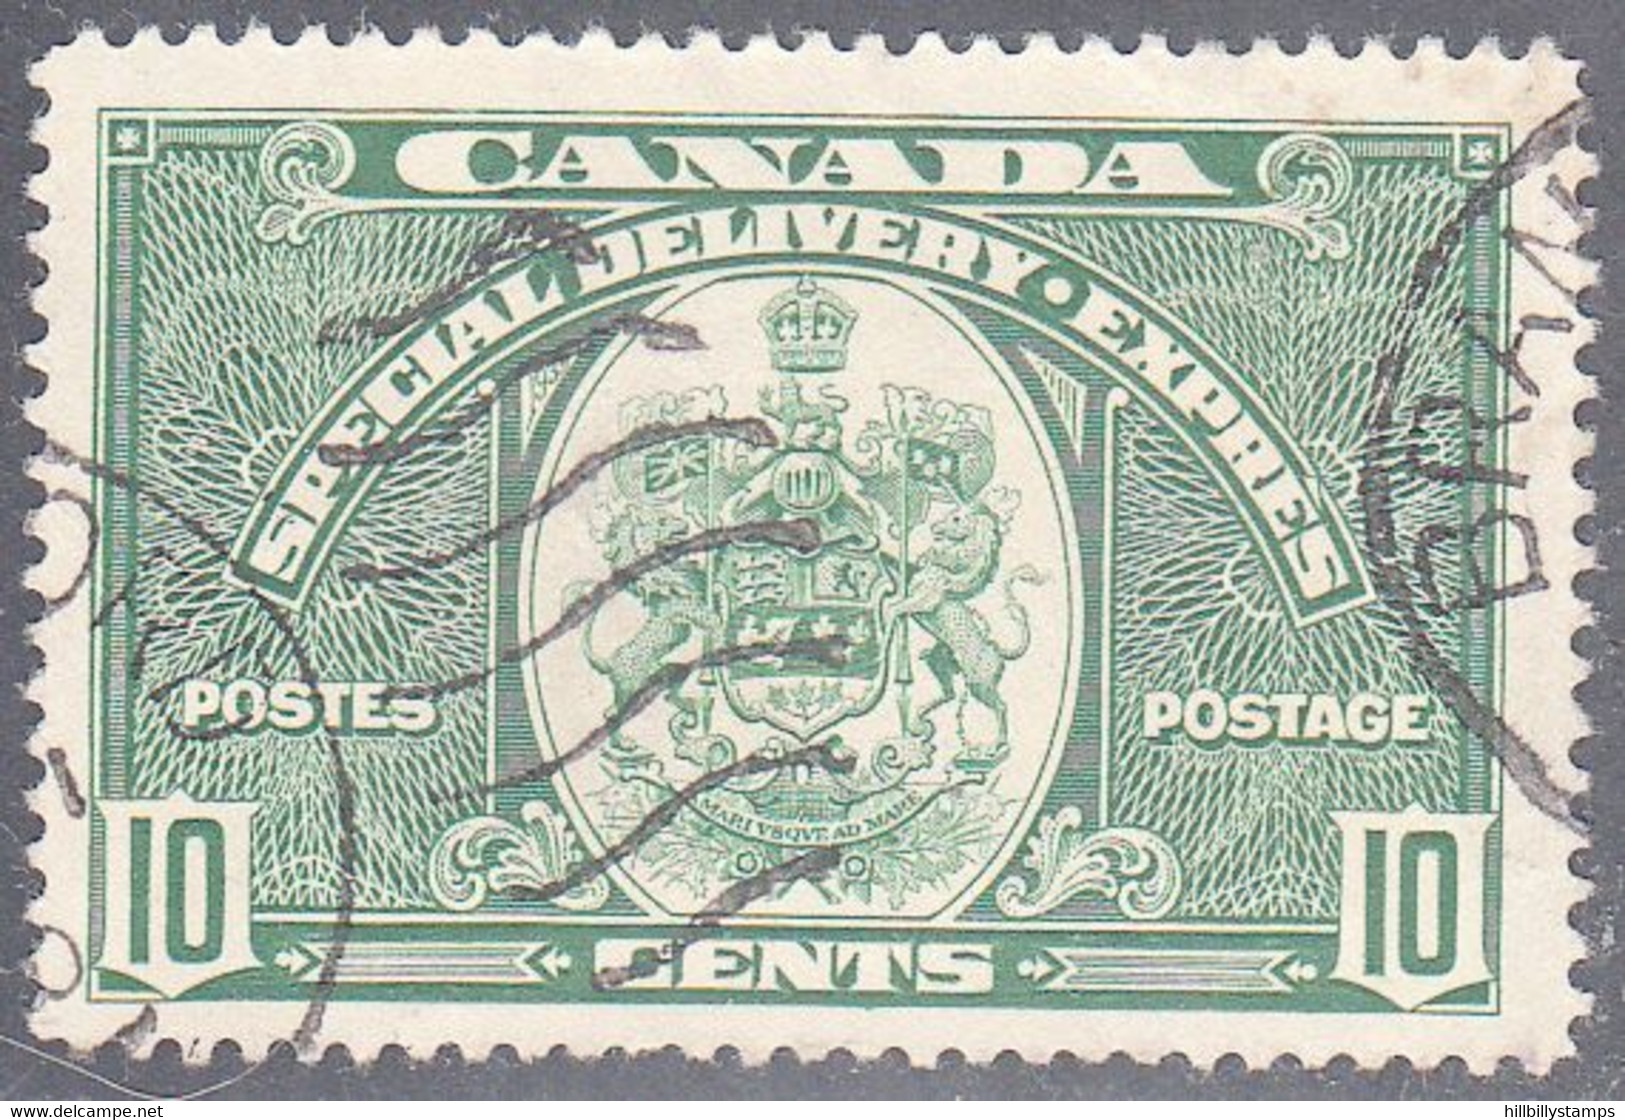 CANADA   SCOTT NO E7  USED   YEAR  1938 - Exprès